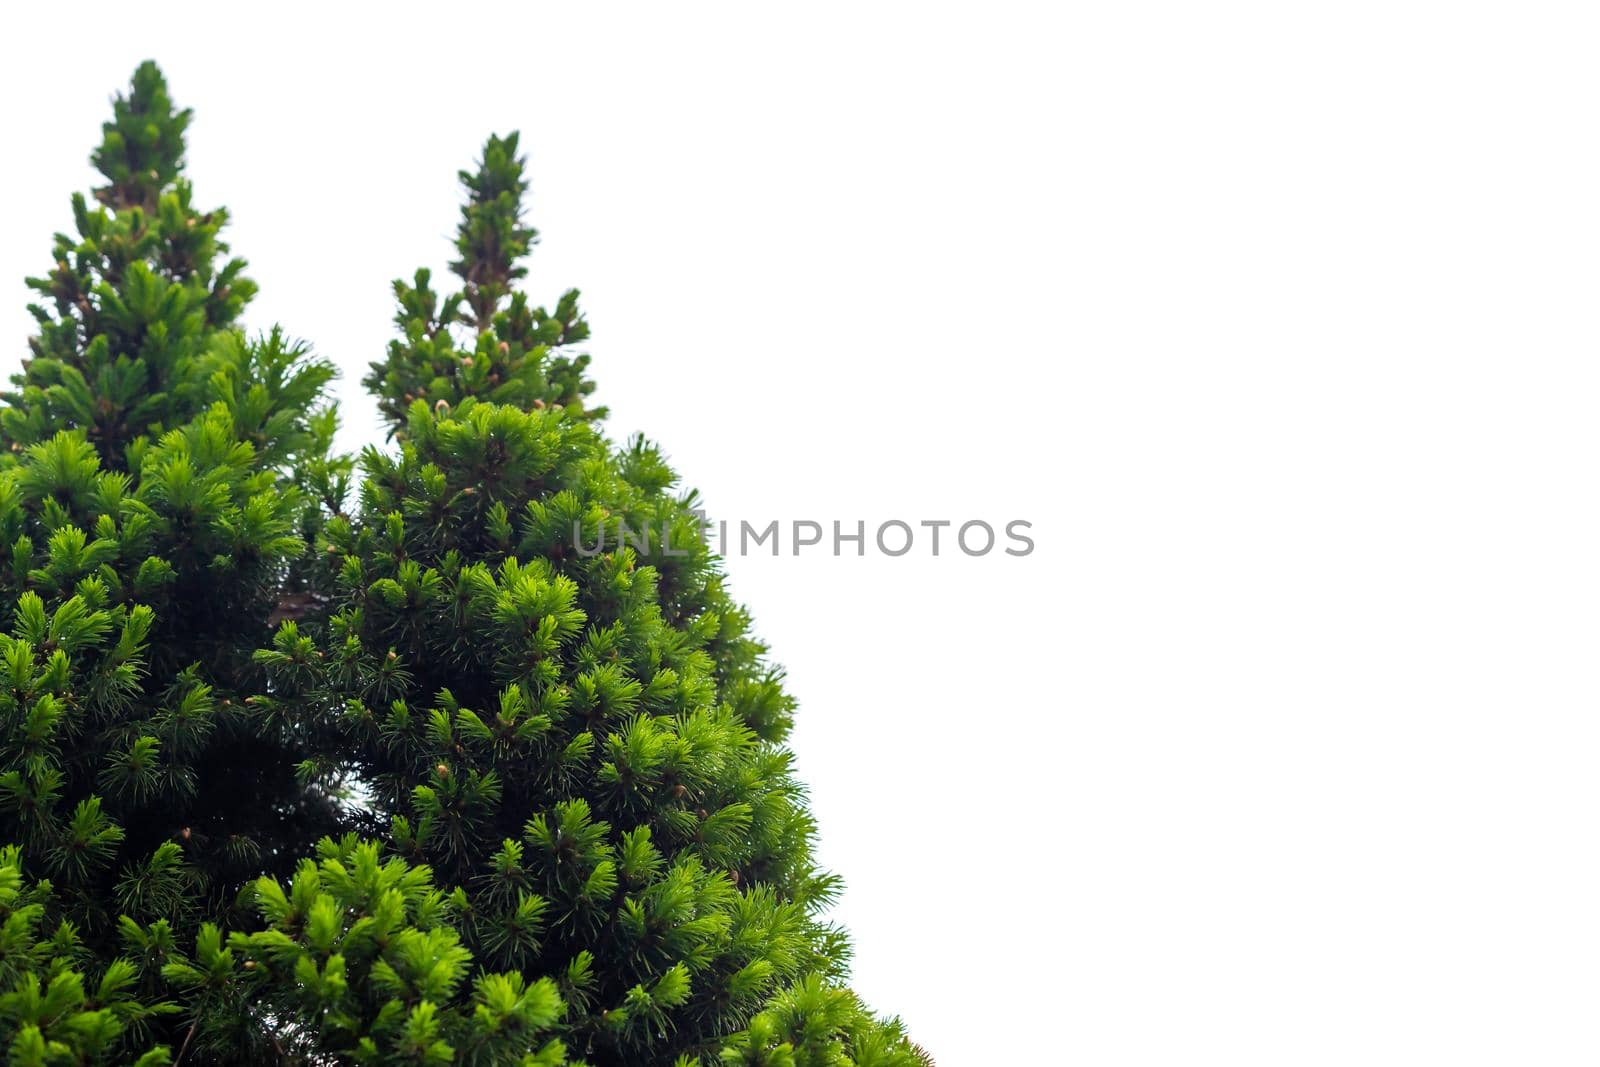 Fresh pine tree isolated in corner on white background. Selective focus, close-up view